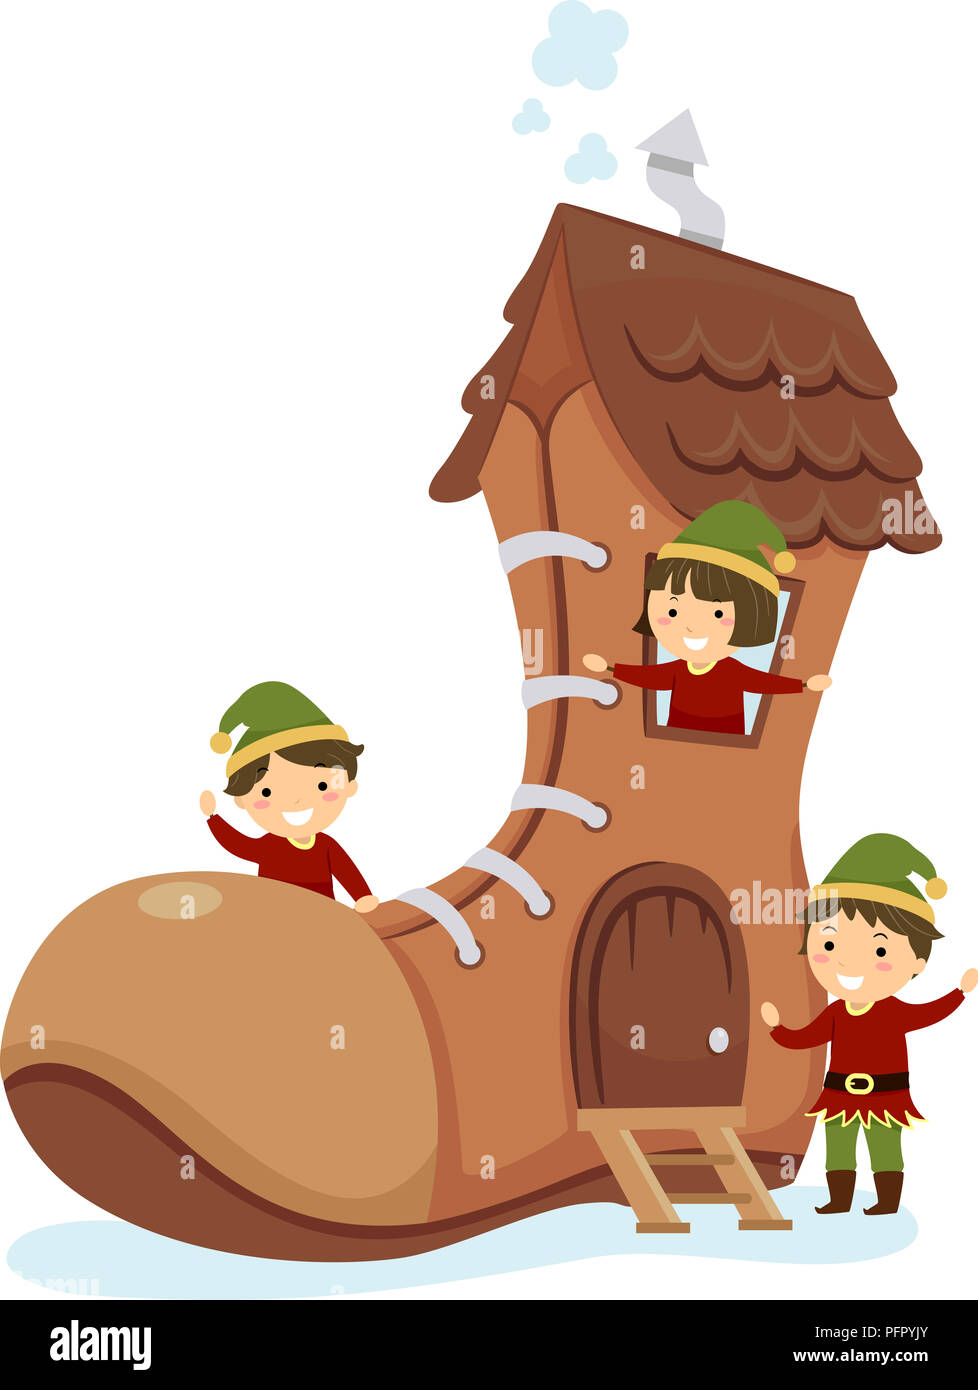 Illustration of Stickman Kids Elf with a Big Brown Shoe House Stock Photo